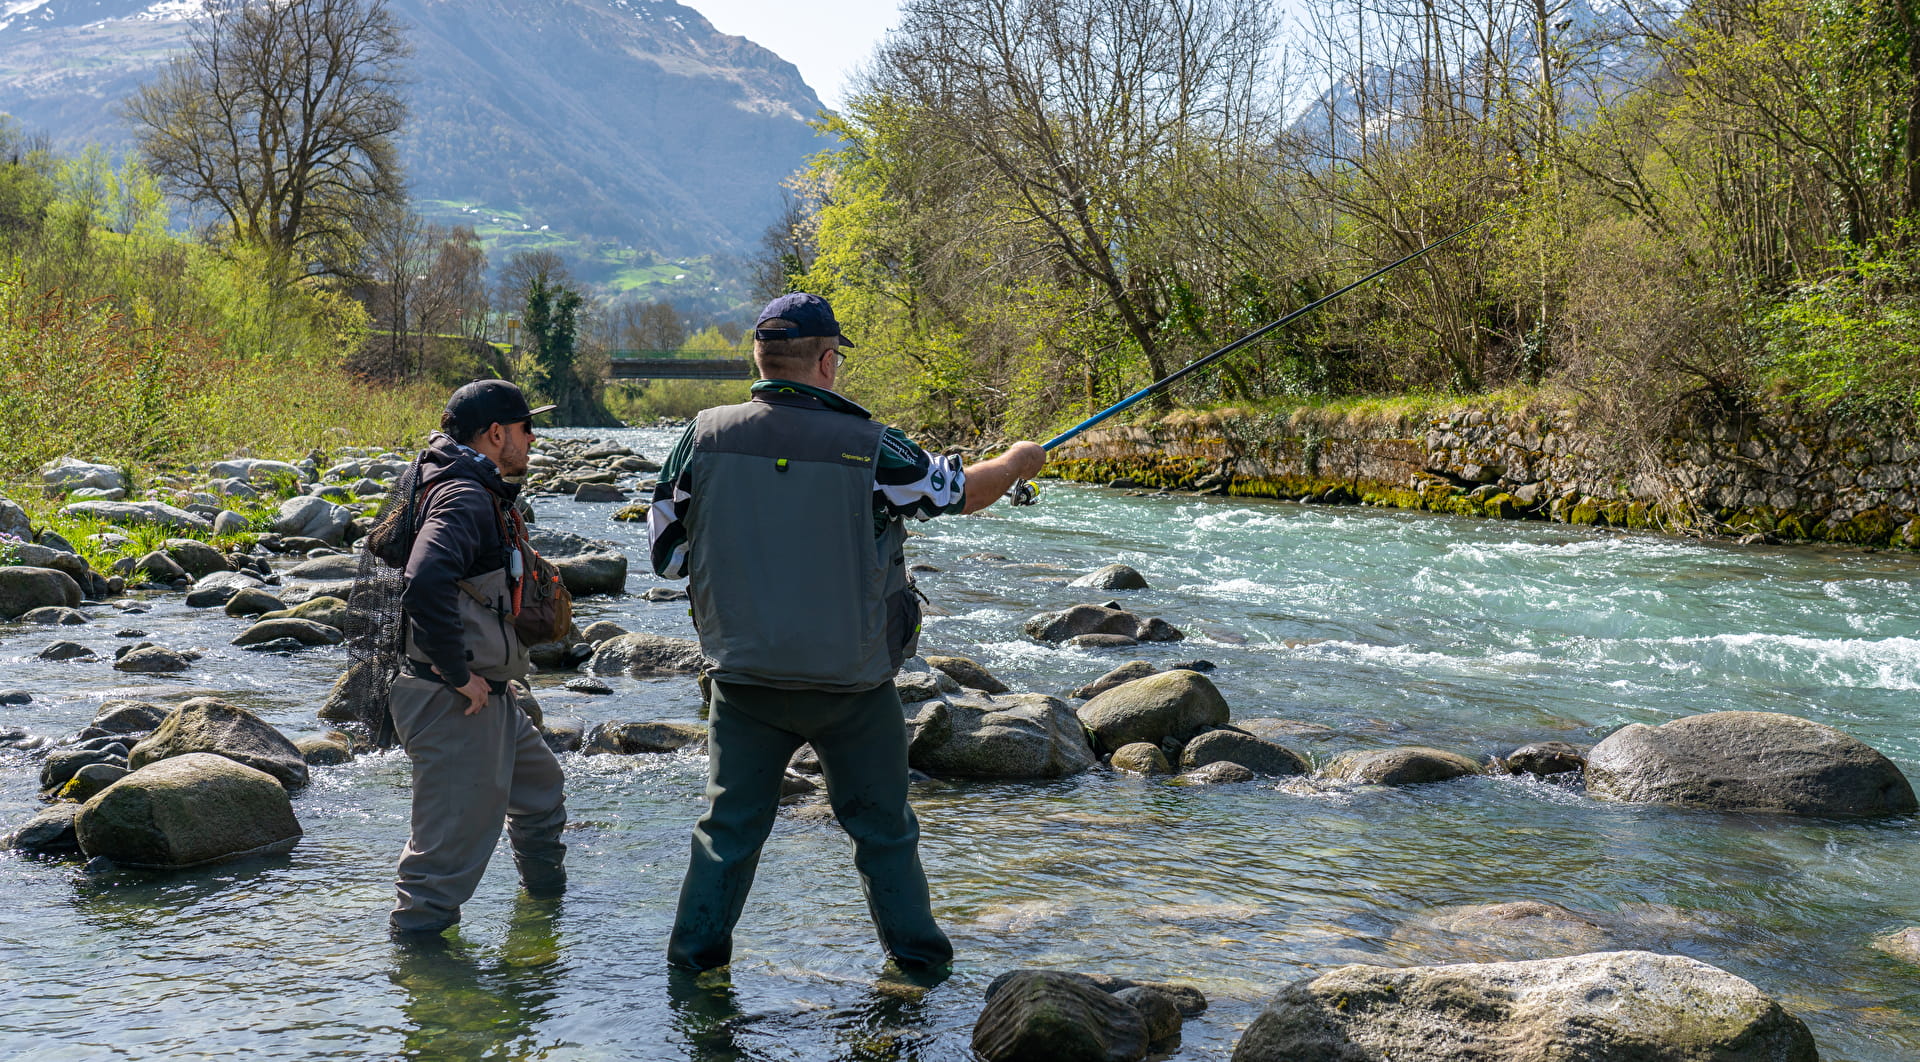 The Making of A Passion for Angling - Angling Heritage